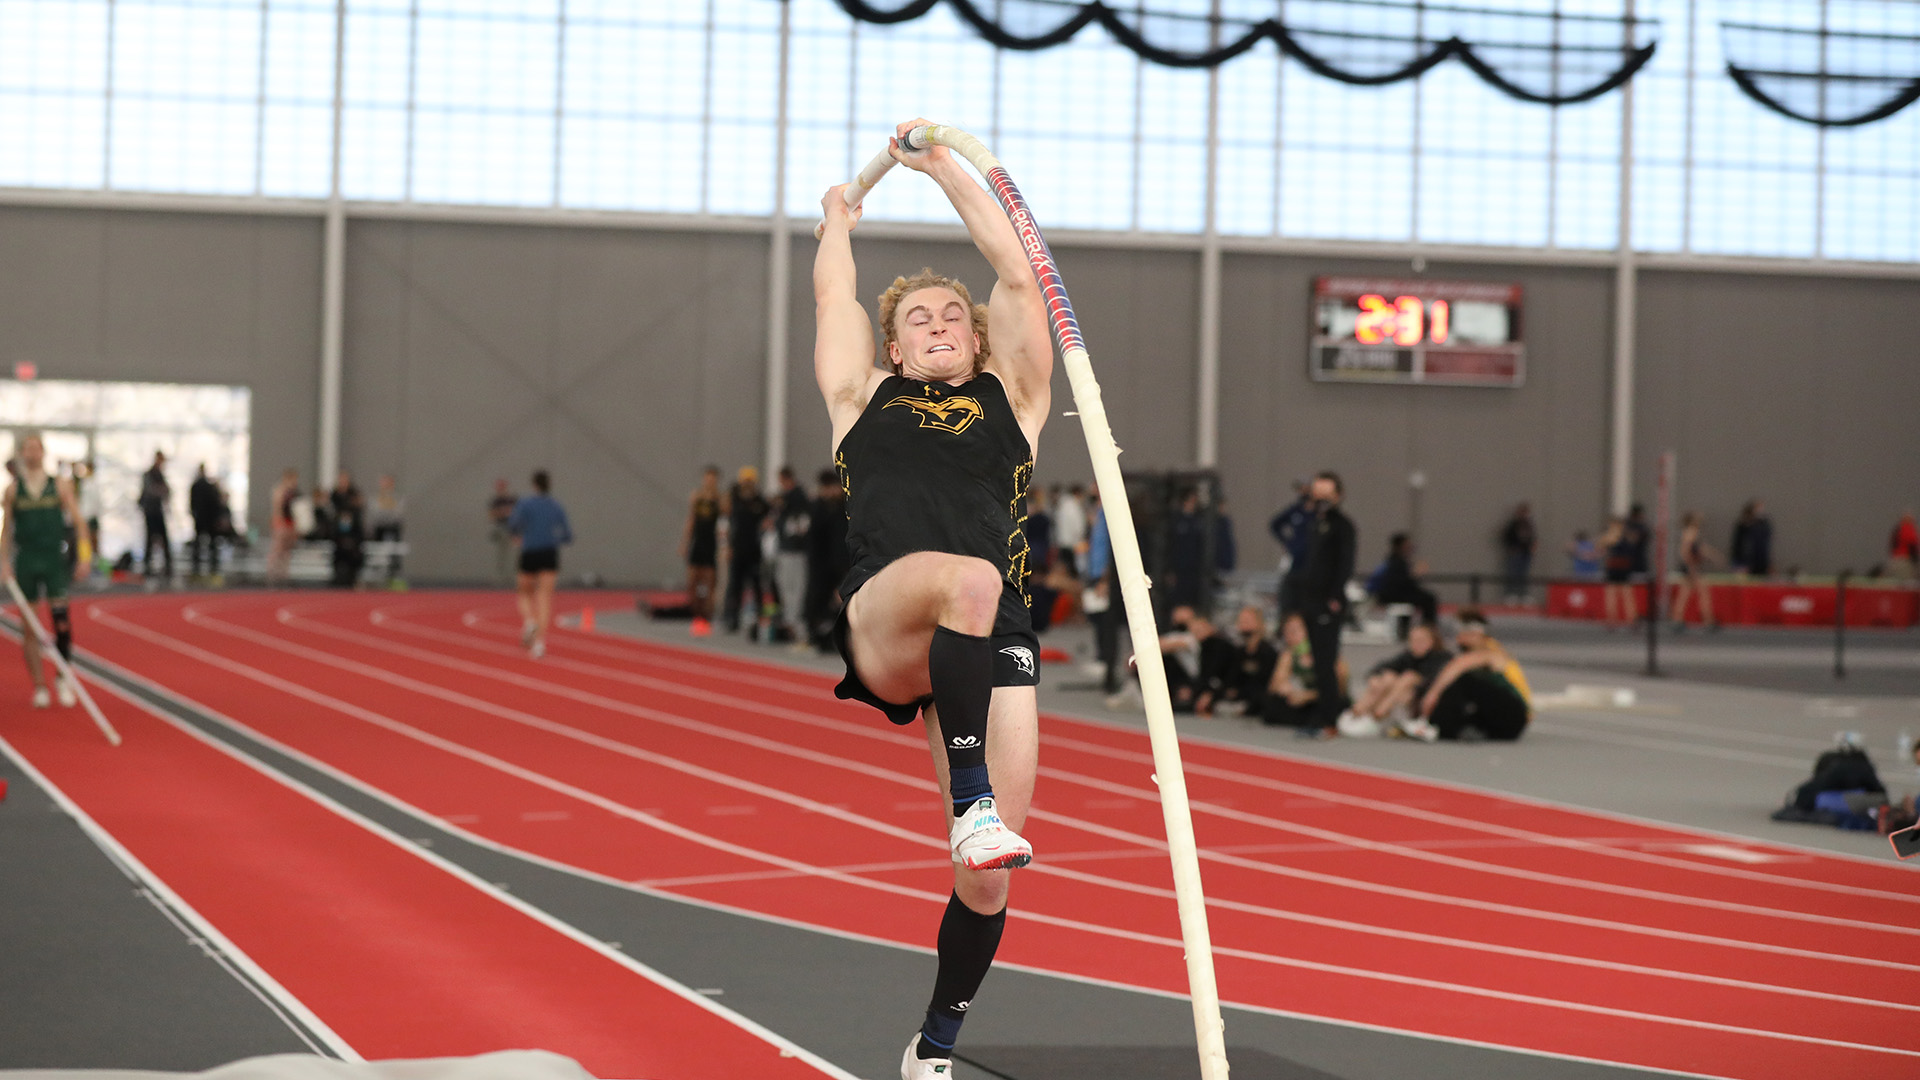 Eli Tranel won the pole vault with a height of 15-11 that ranks fourth nationally.